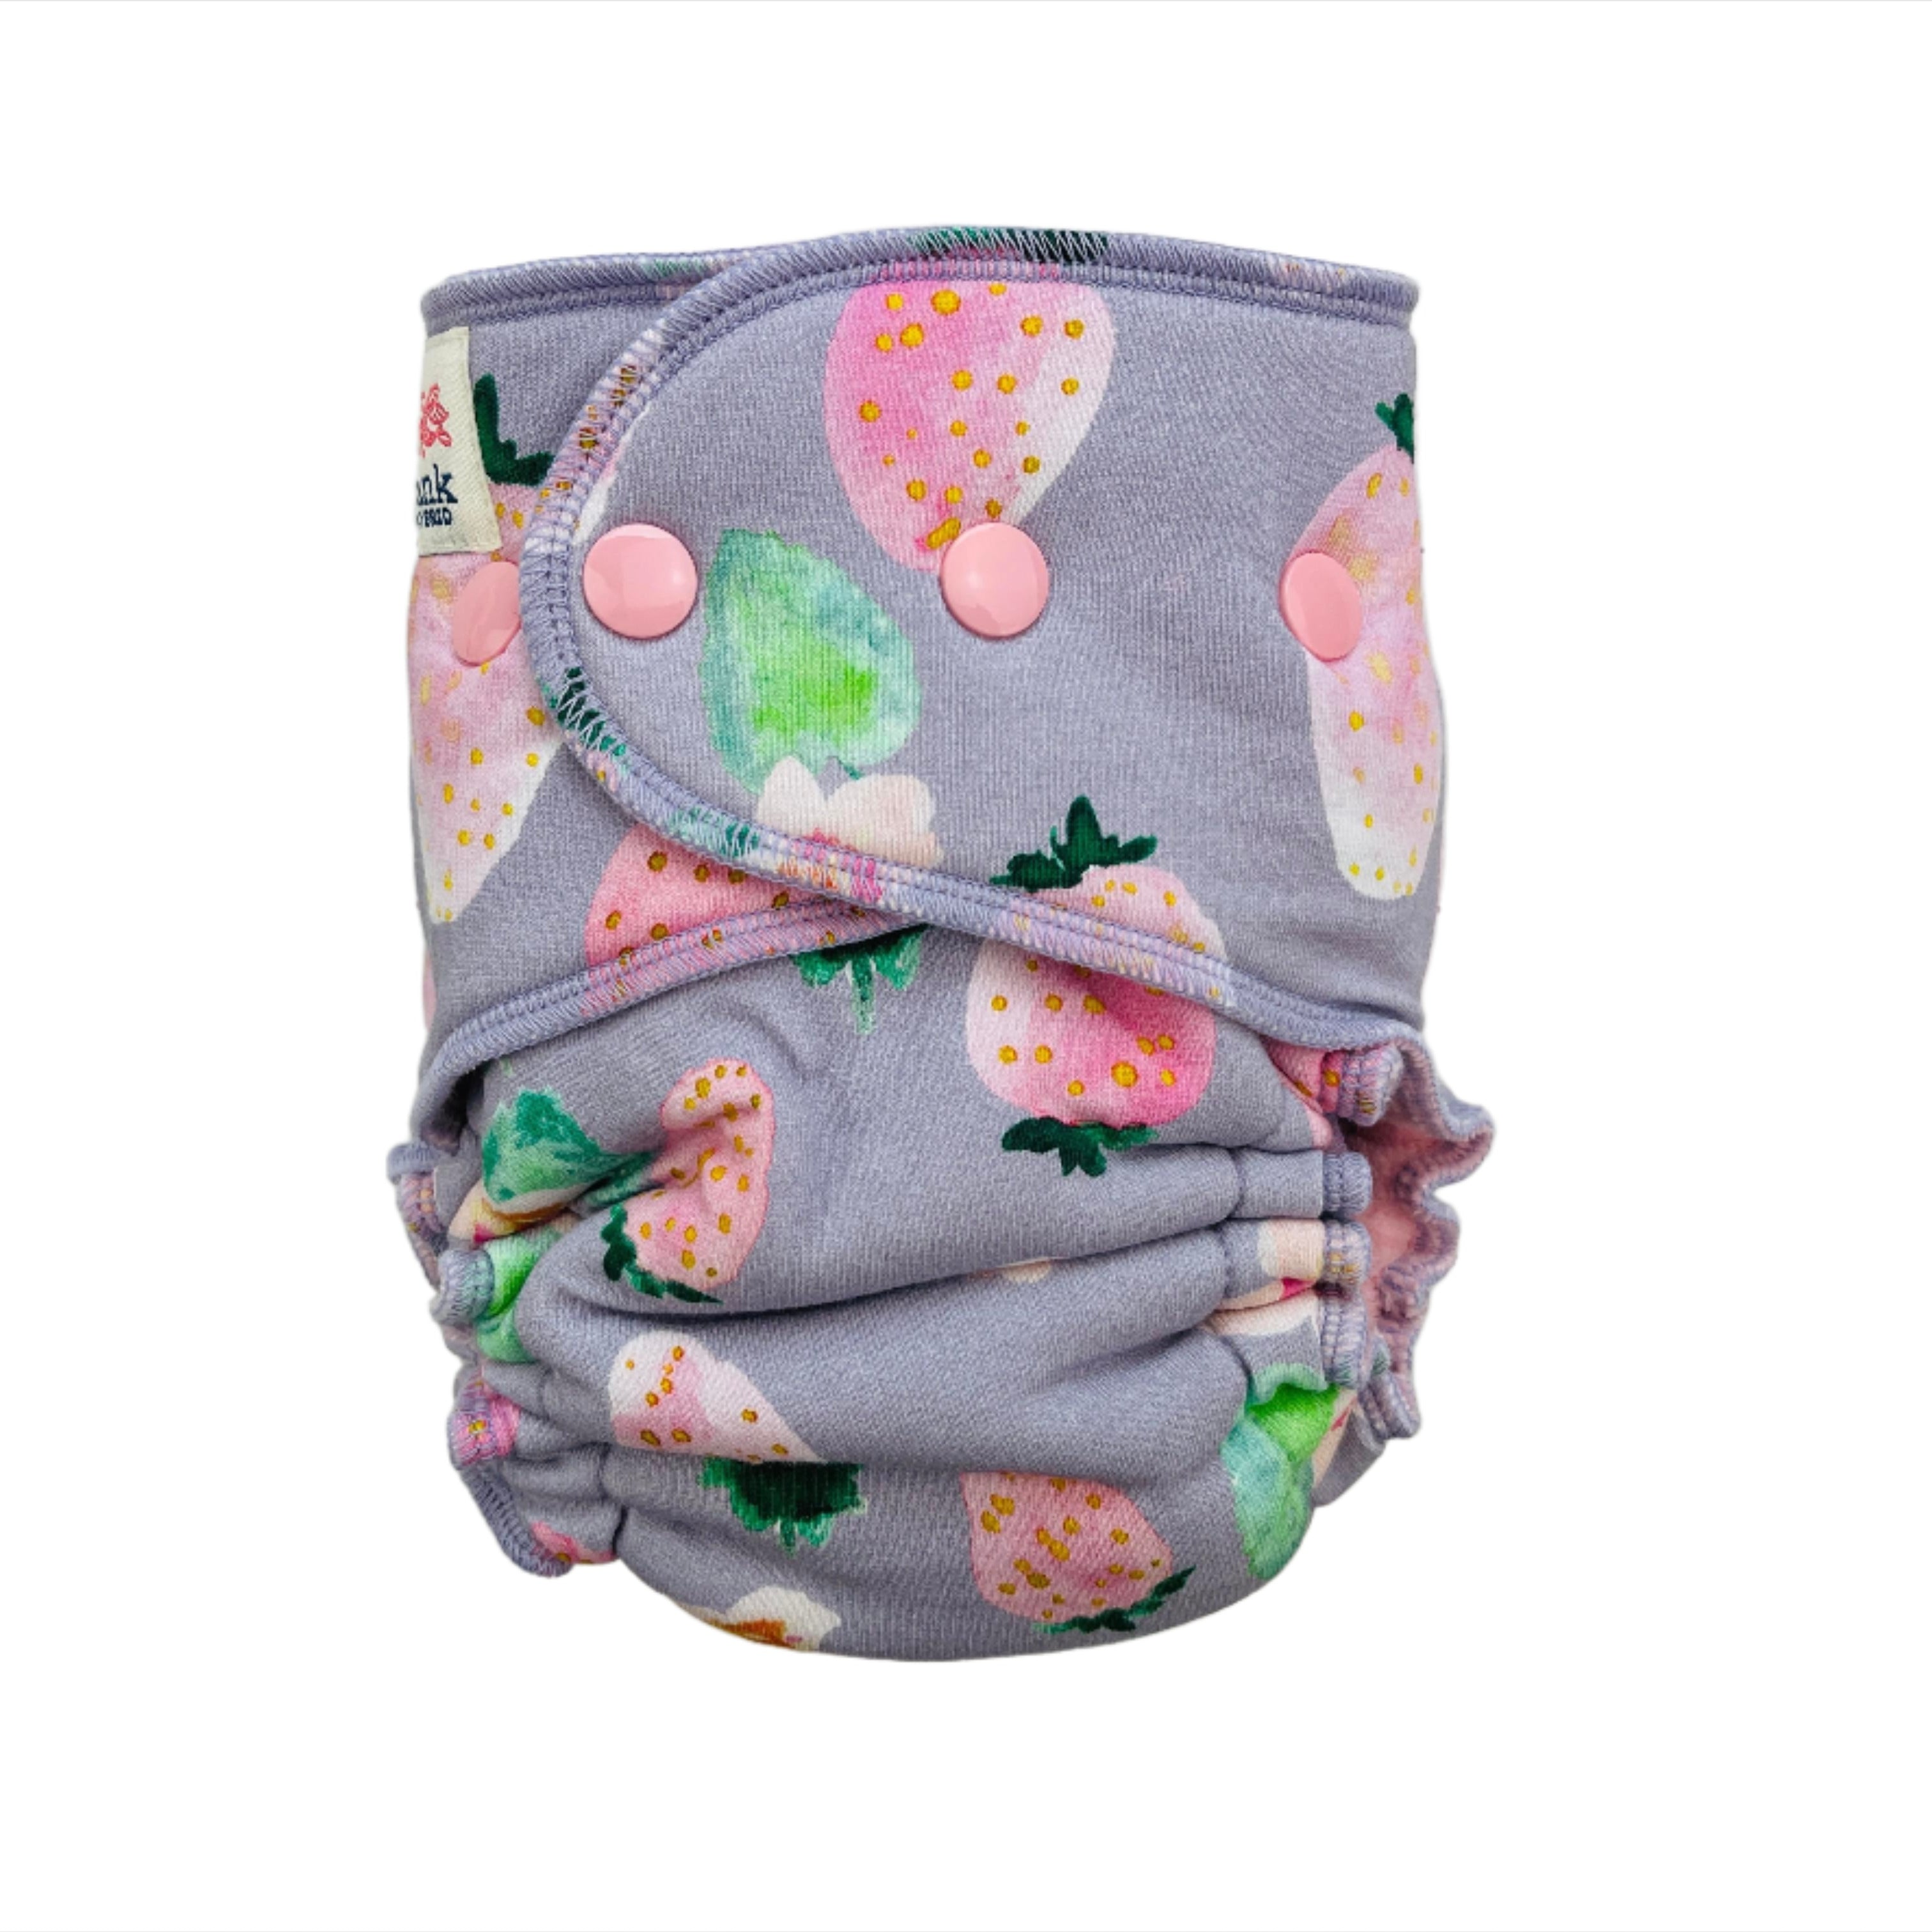 Lilly & Frank Fitted Cloth Diaper Strawberry Smoothie Petite Hybrid Cloth Diaper - Hybrid - Classic Serged